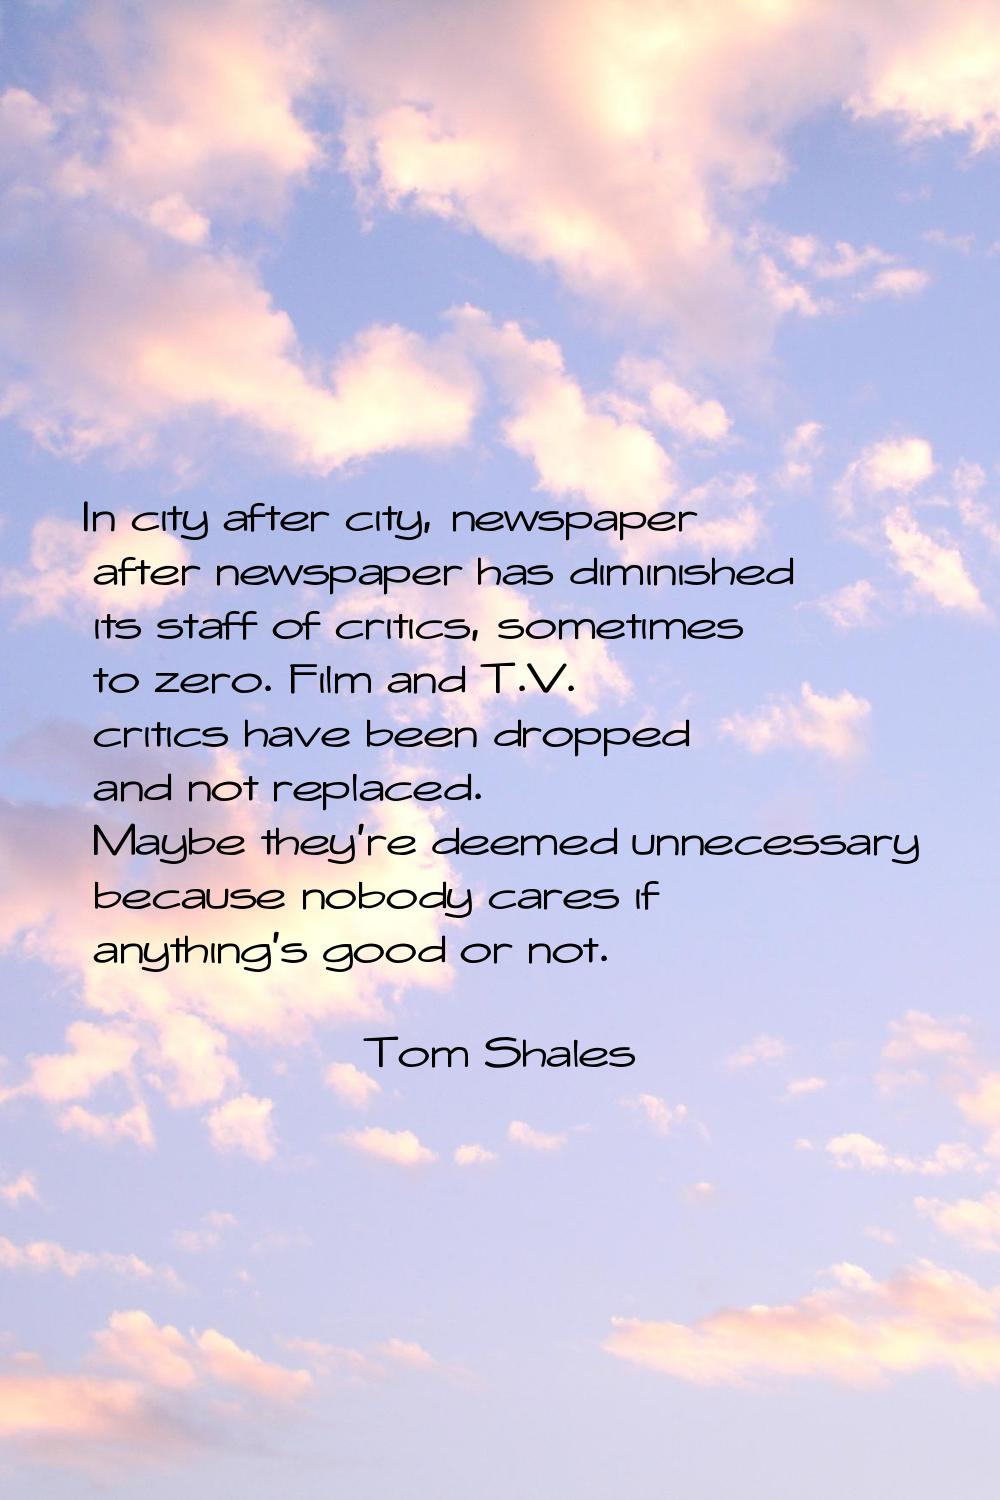 In city after city, newspaper after newspaper has diminished its staff of critics, sometimes to zer